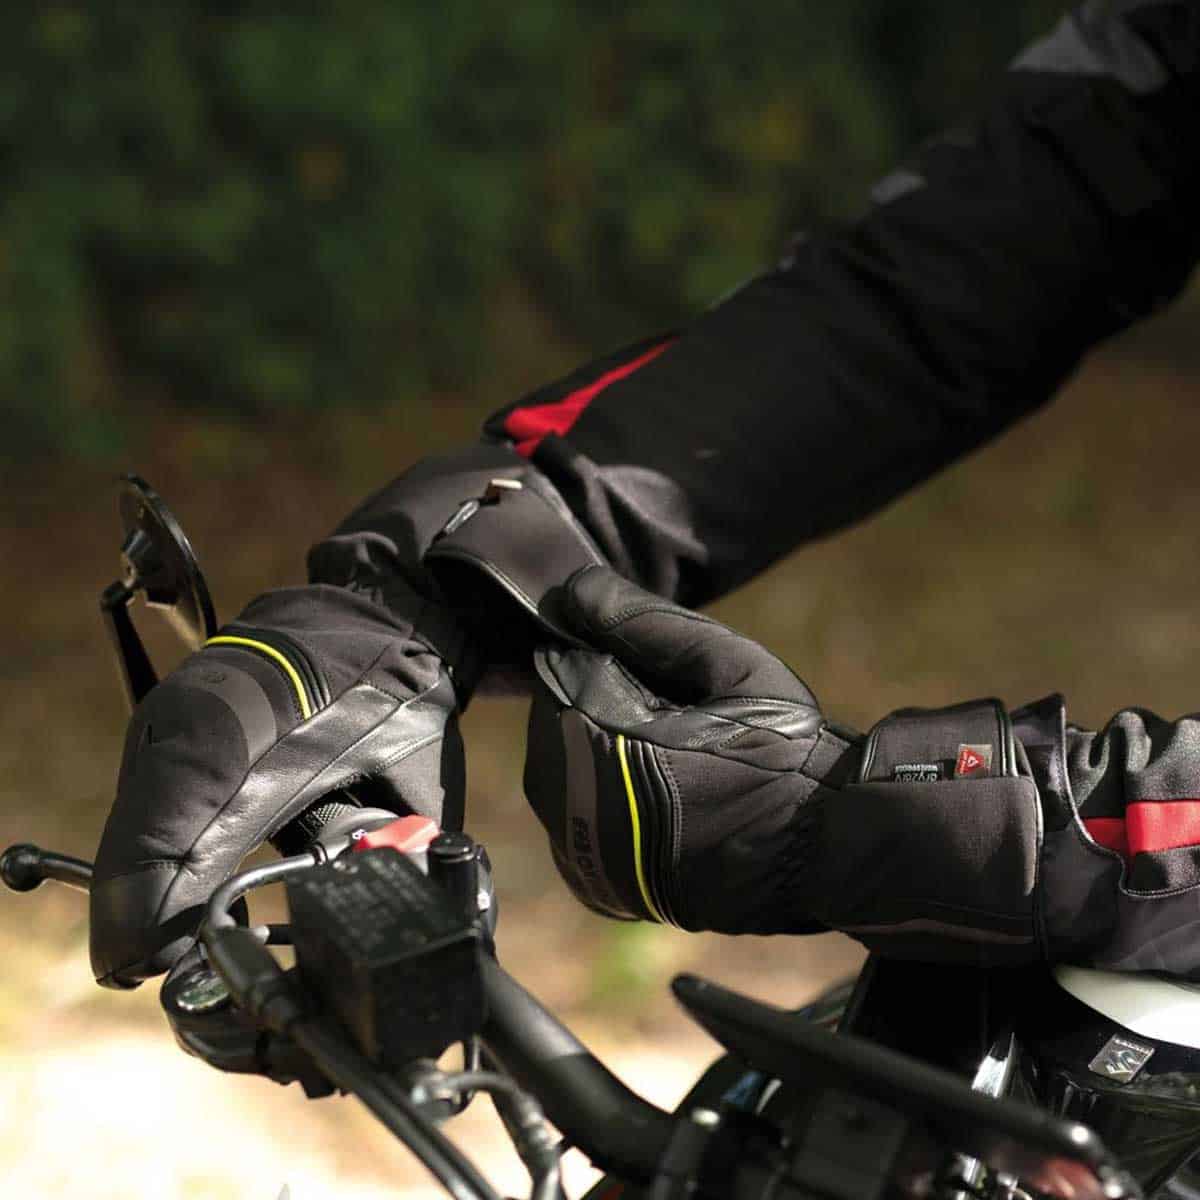 Superior Comfort & Protection: The Oxford Polar 1.0 Winter Motorcycle Gloves with Primaloft